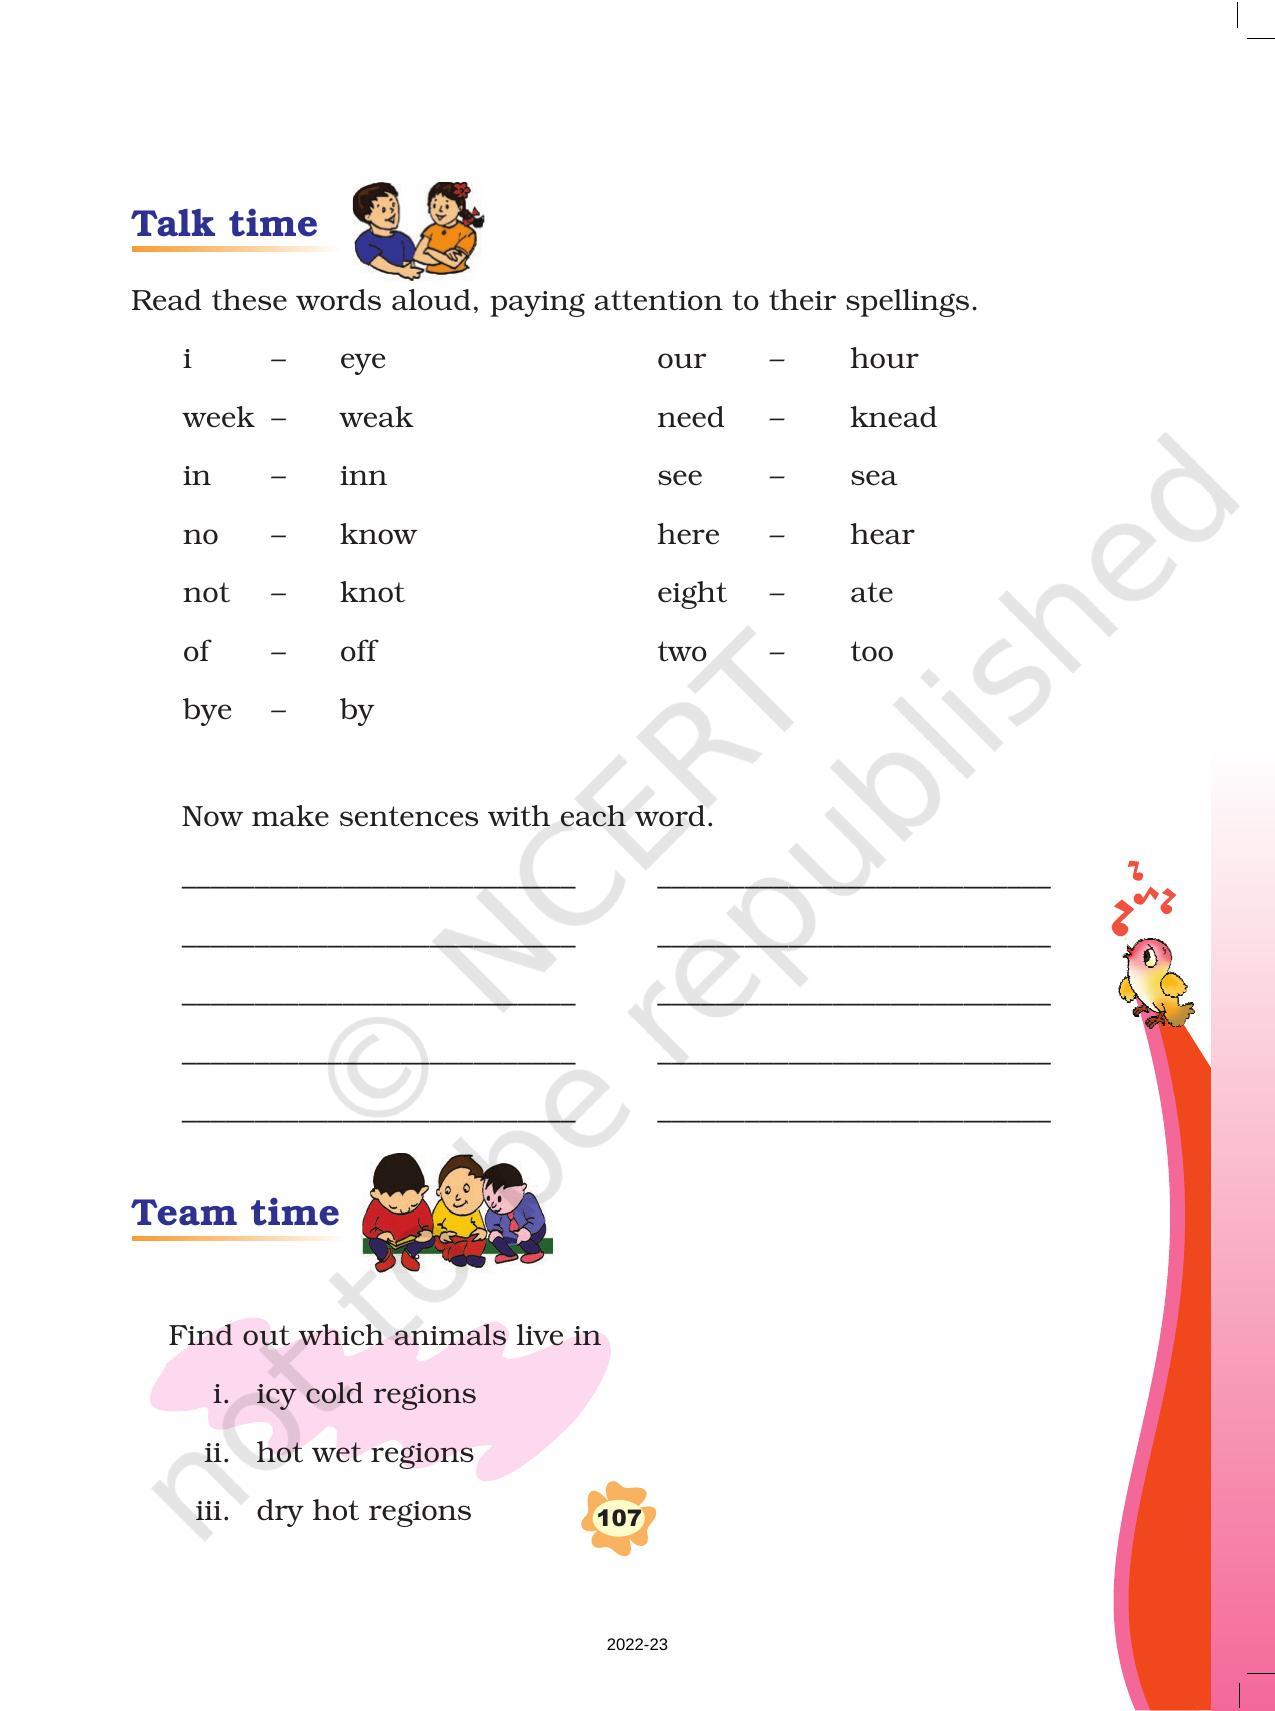 NCERT Book for Class 3 English: Unit X.1-How Creatures Move - Page 11